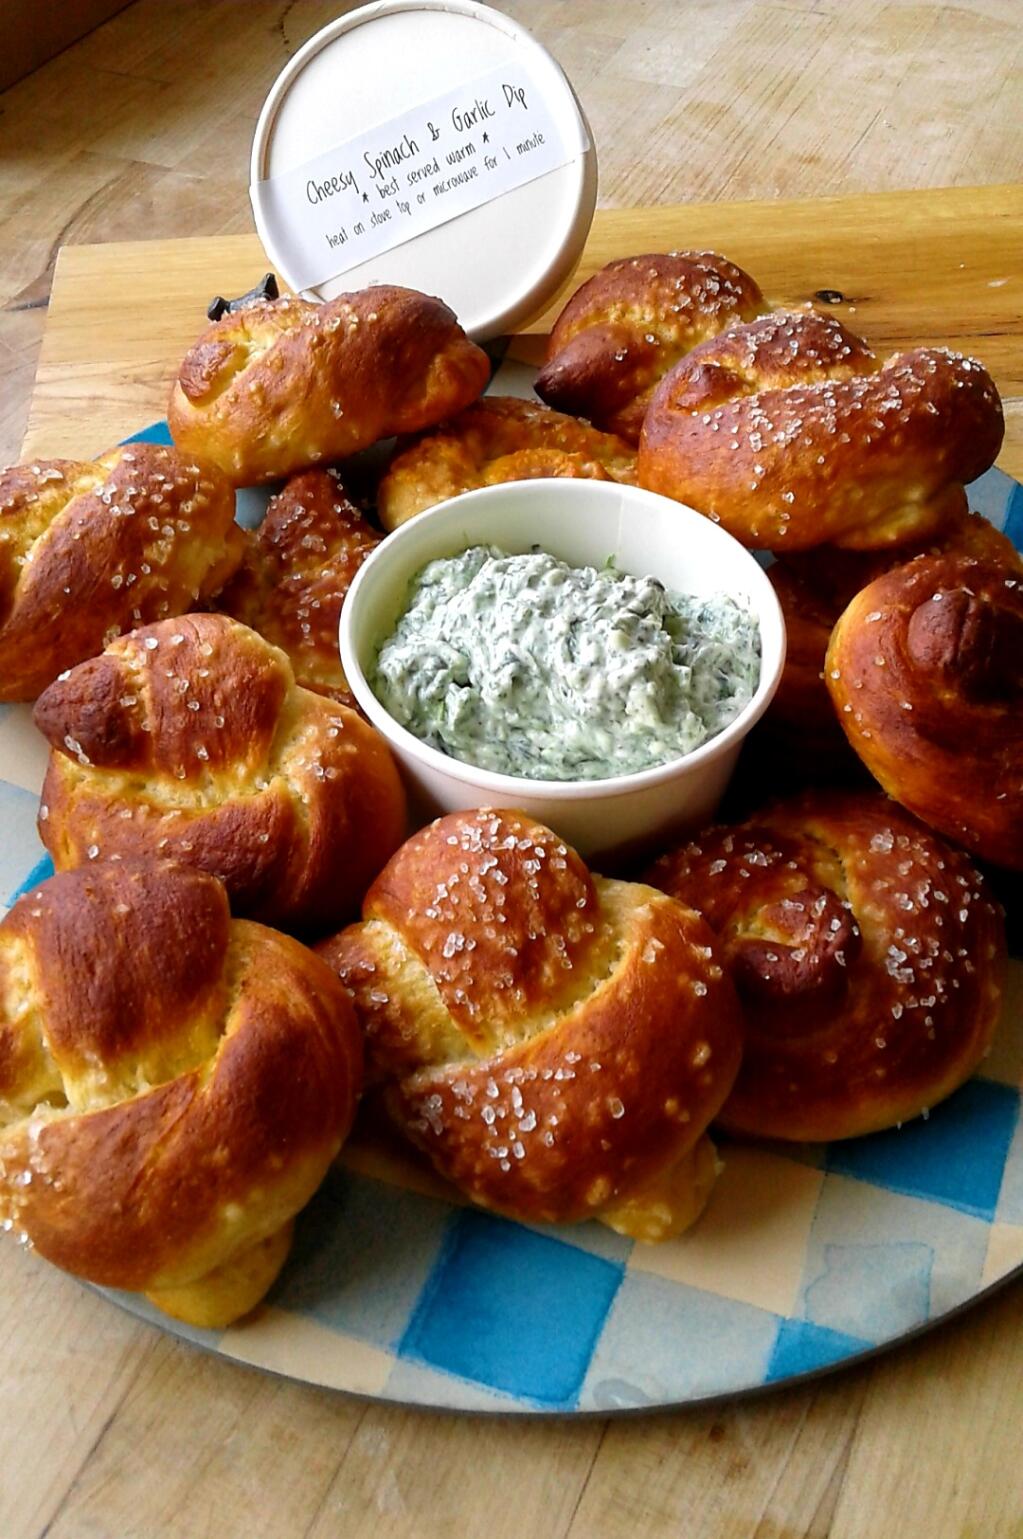 Sea Salt Pretzels with Spinach & Garlic Dip from Clare Hulme of Wooden Petal in Santa Rosa.